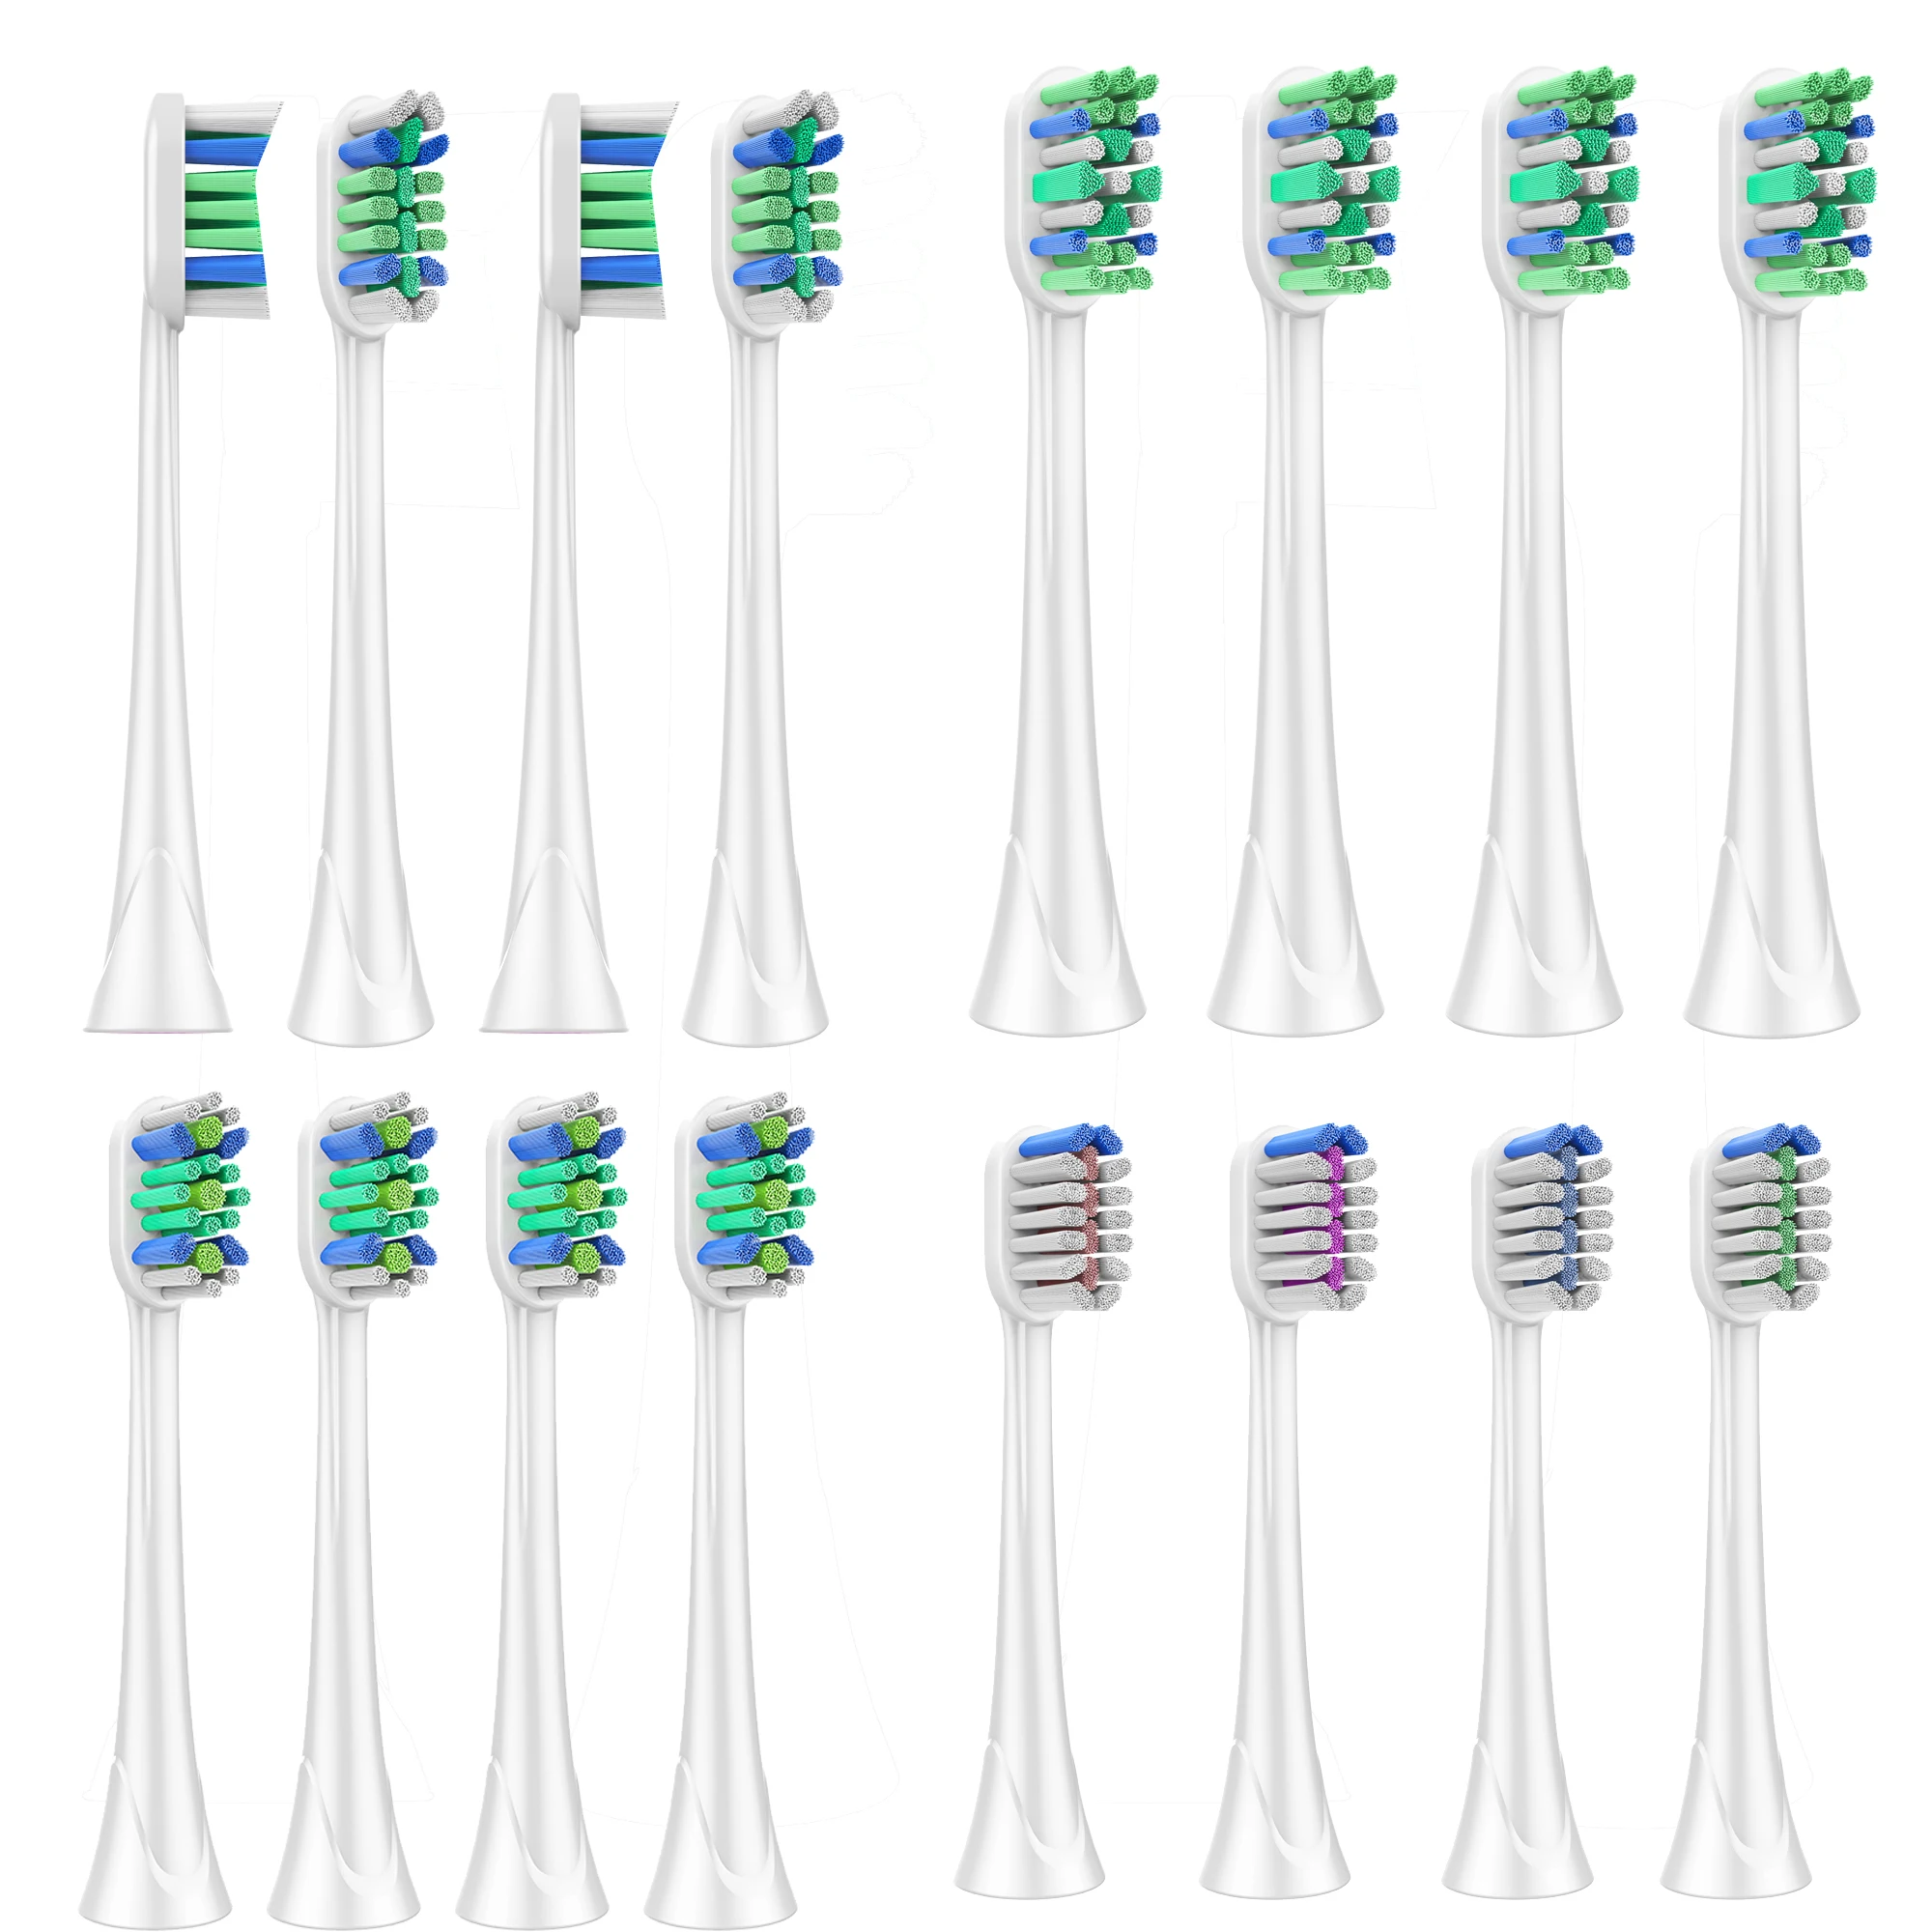 16Pcs Replacement Toothbrush Heads Compatible , hx6014 DiamondClean, HealthyWhite, FlexCare